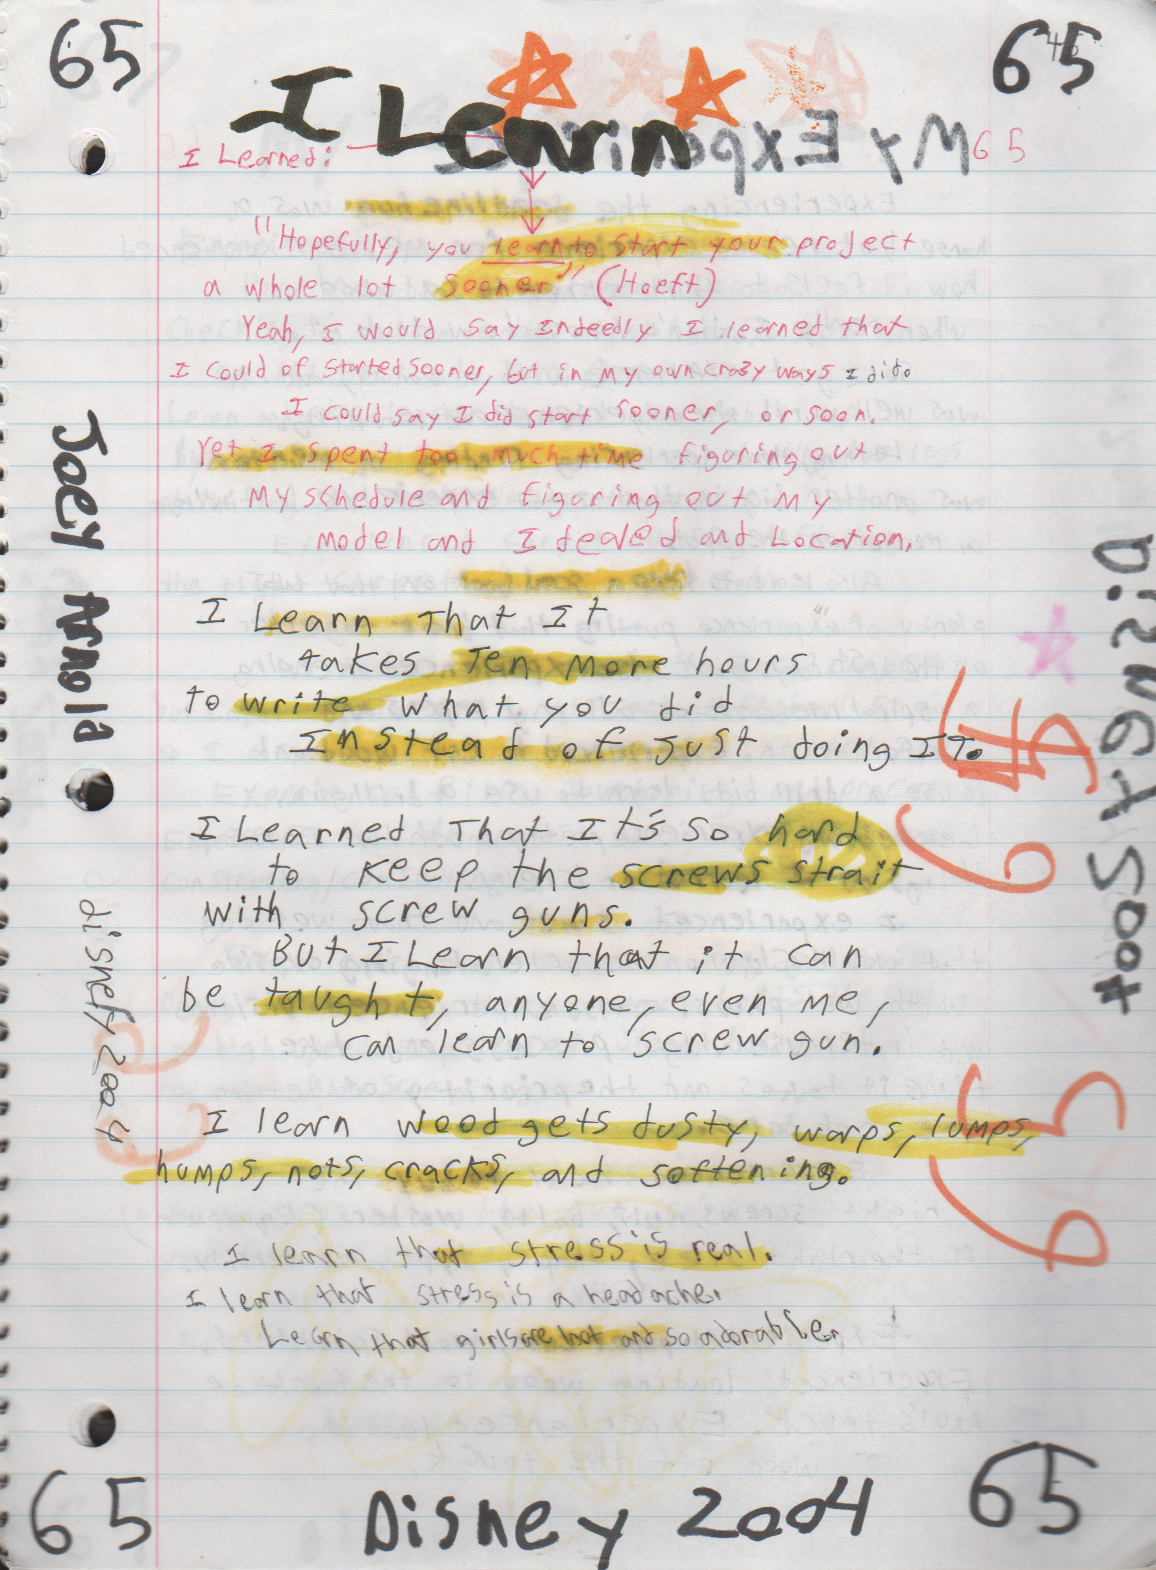 2004-01-29 - Thursday - Carpetball FGHS Senior Project Journal, Joey Arnold, Part 02, 96pages numbered, Notebook-63.png